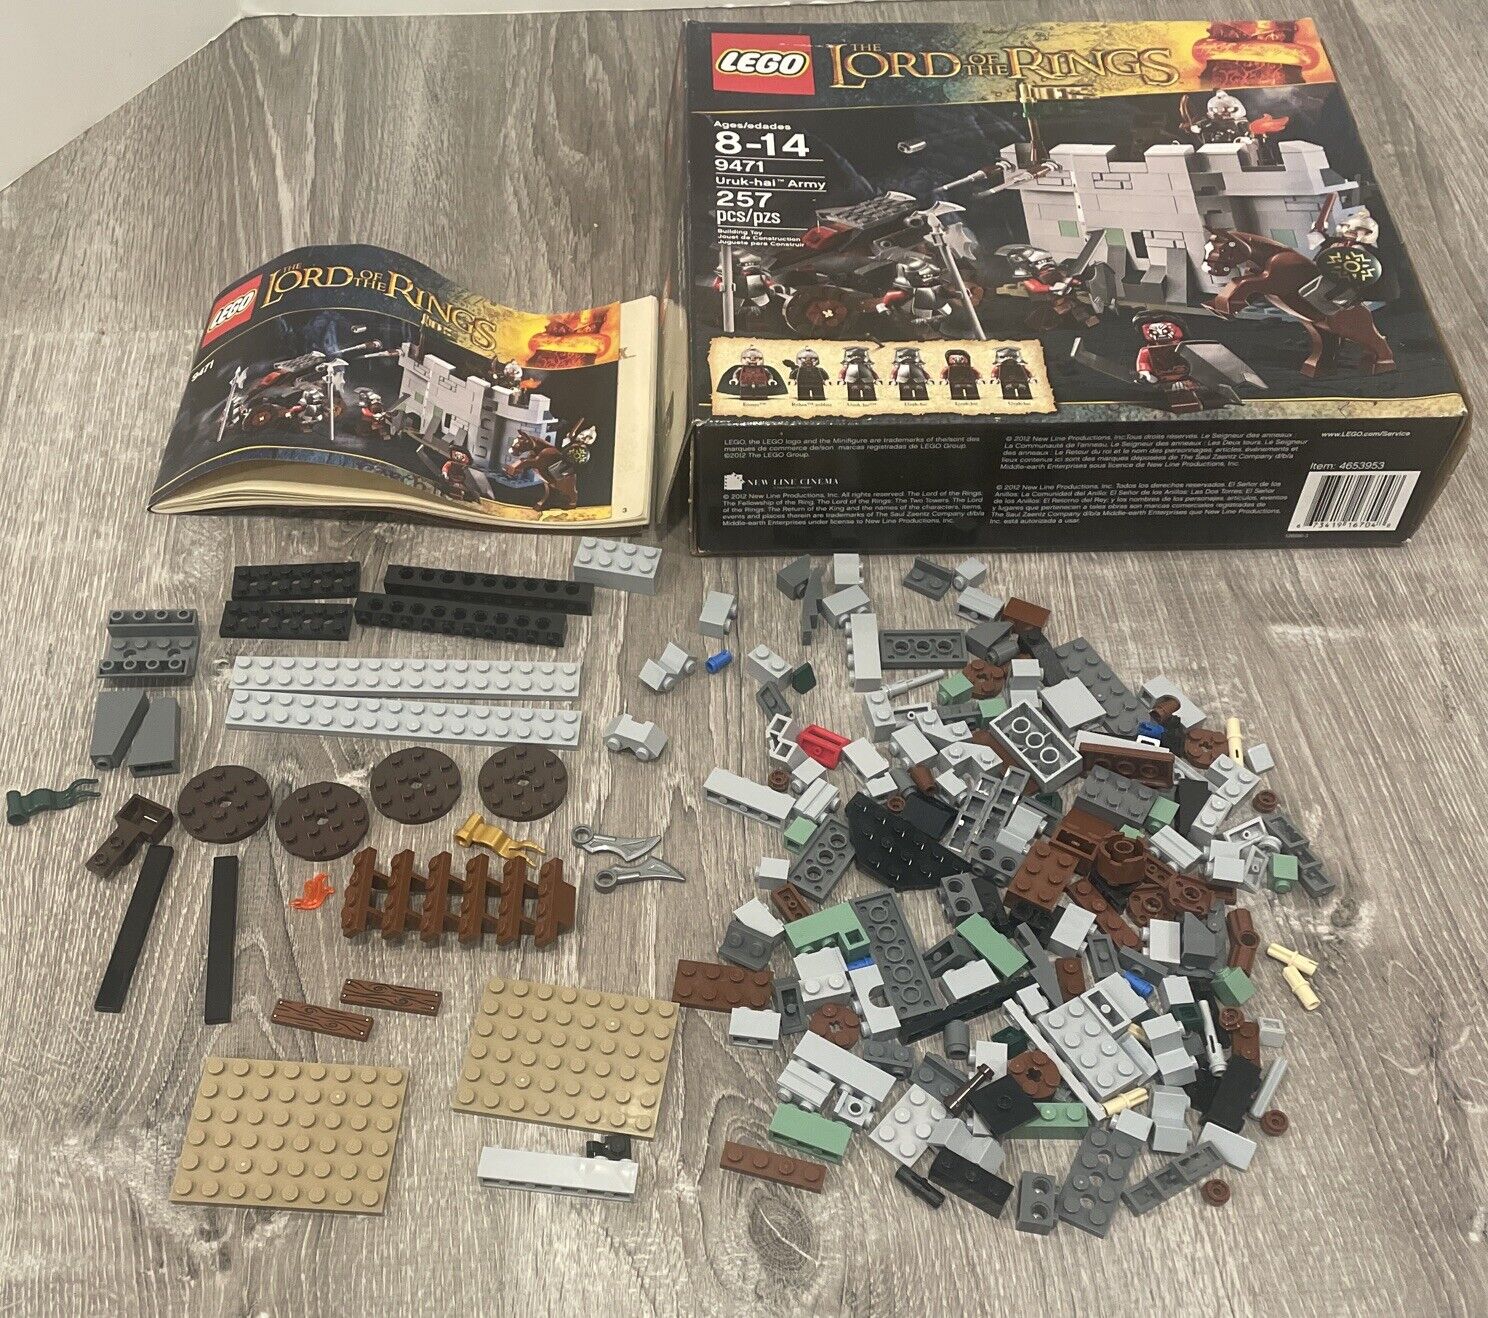 Lego 9471 Lord Of The Ring Uruk-hai Army,Not Complete: Instructions, Pieces, Box